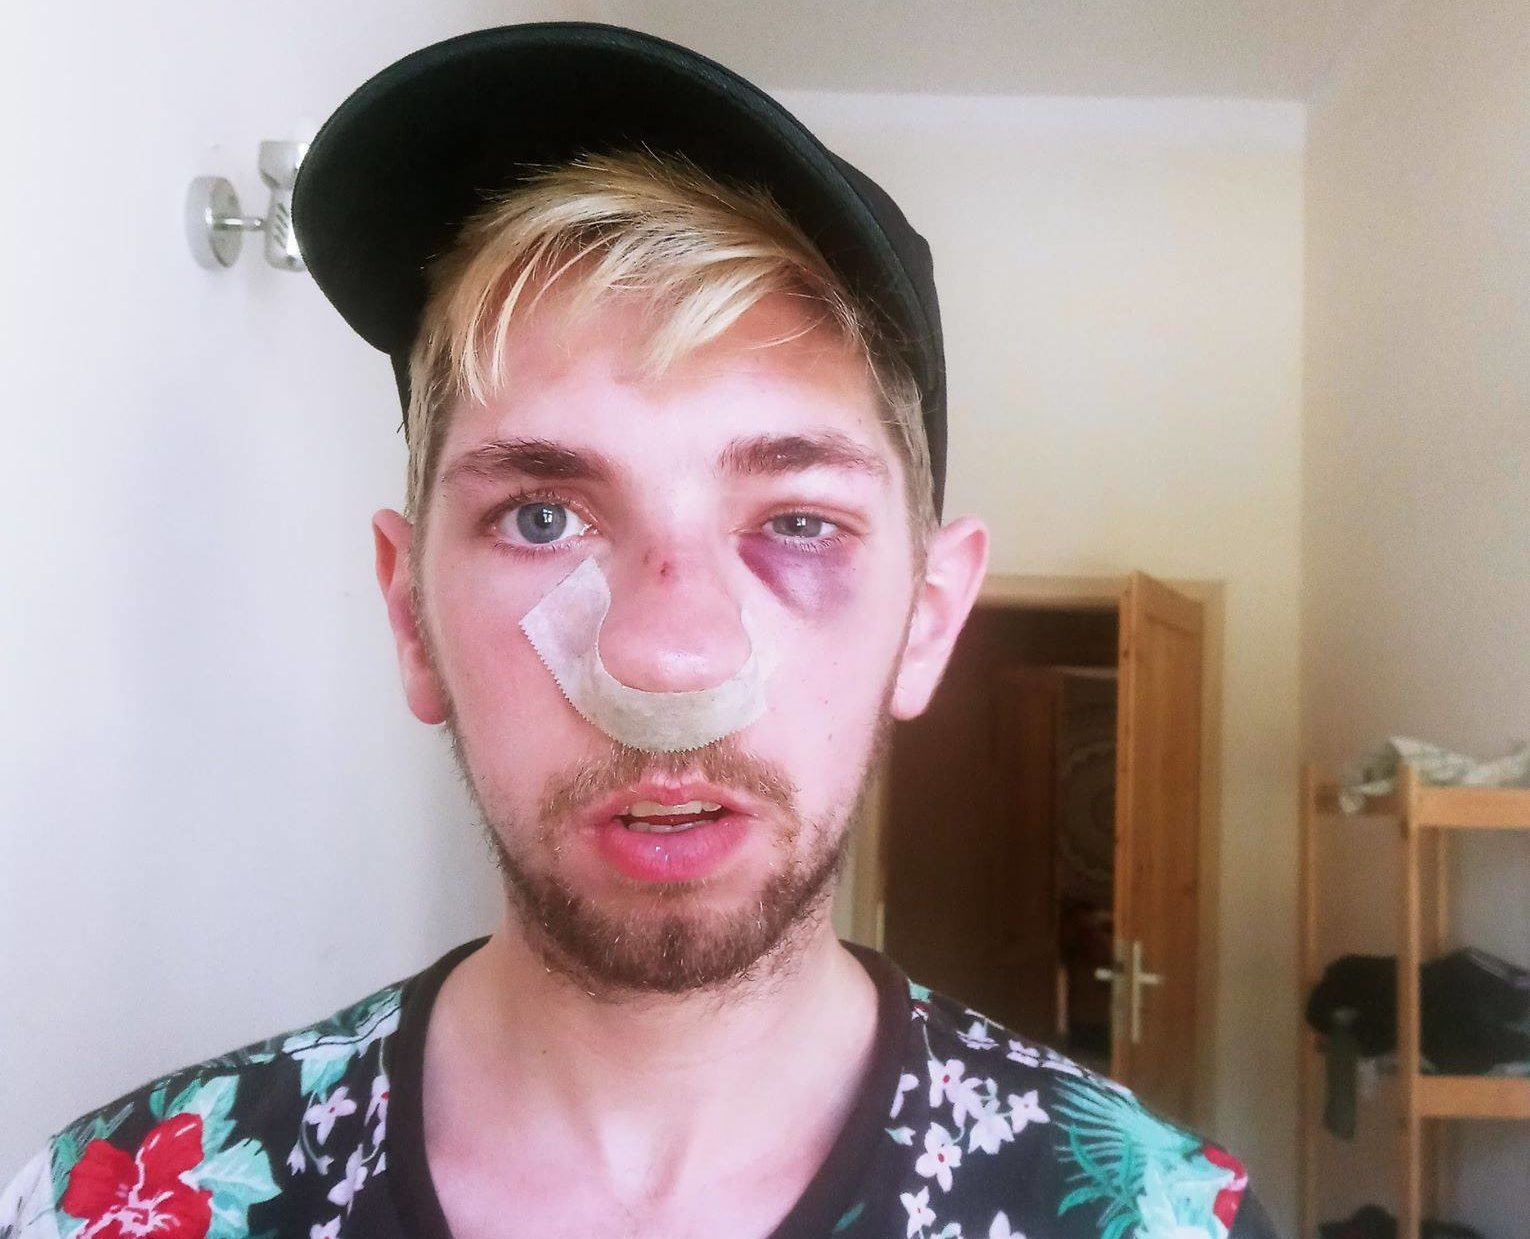 Poland Gay Man Brutally Attacked By Drunk Thugs I